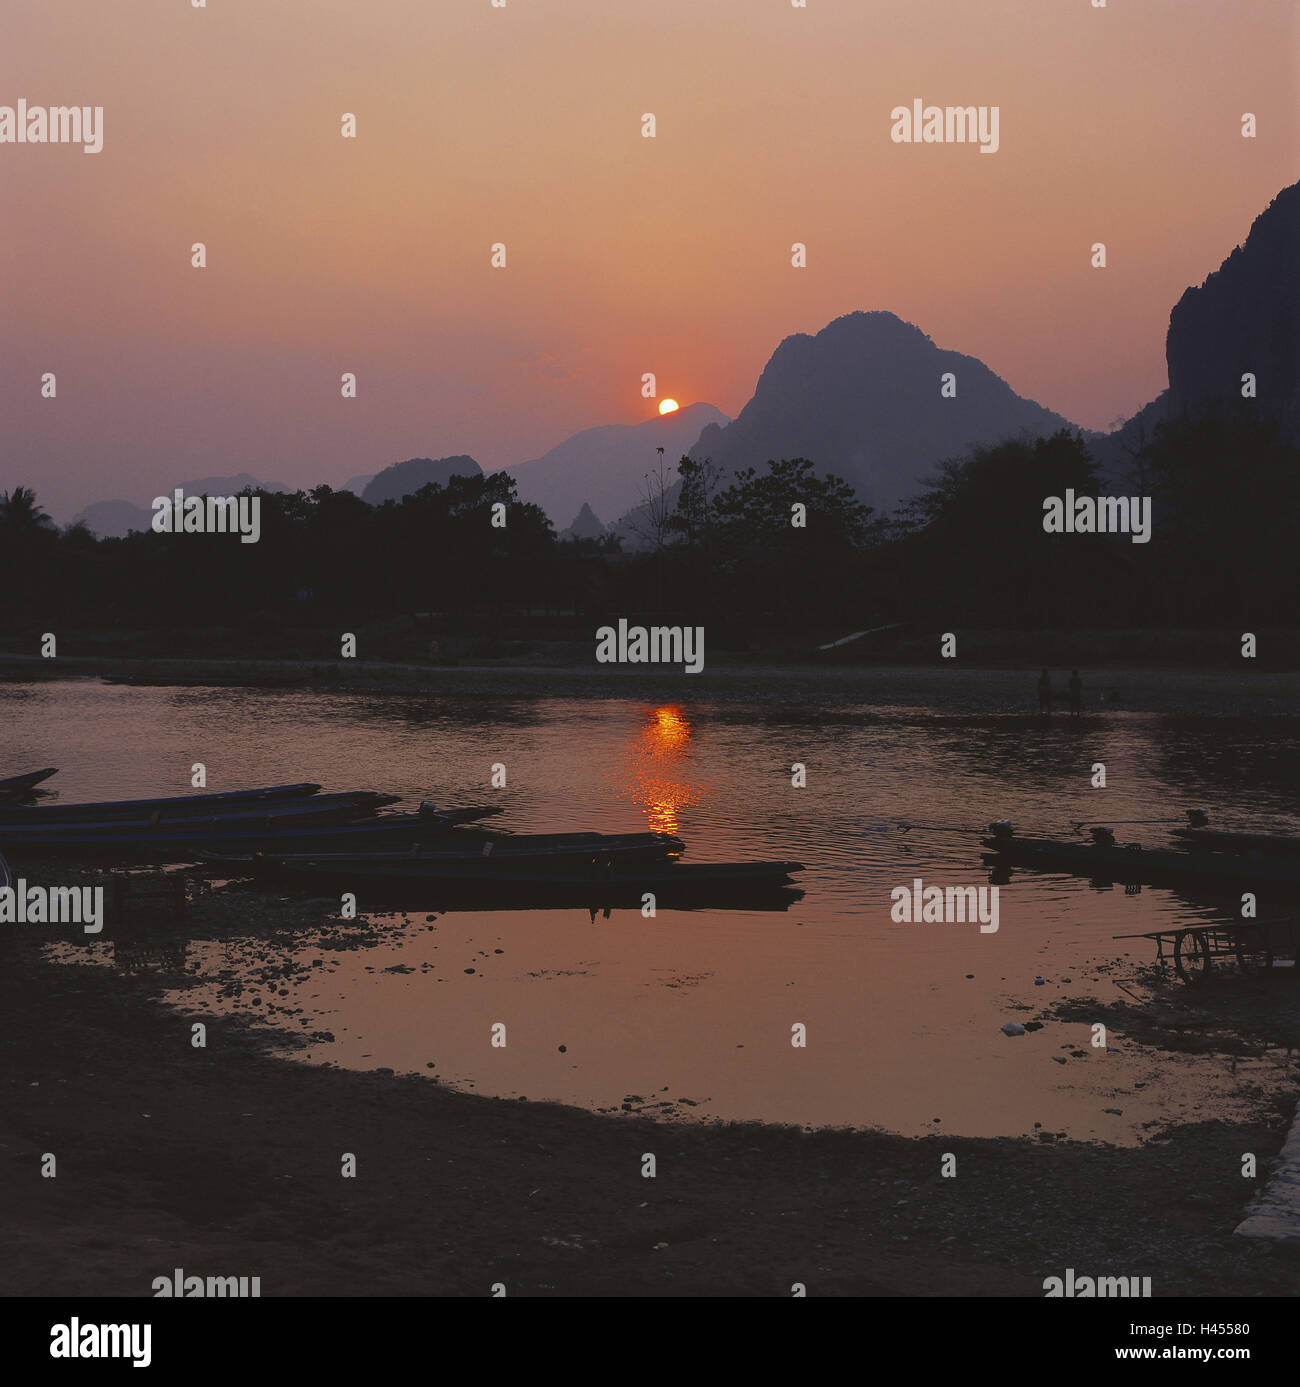 Laos, Vang Vieng, river Nam Song, mountains, sundown, Asia, South-East Asia, destination, tourism, limestone rock, riverside, scenery, nature, the sun, afterglow, boots, mirroring, water surface, Stock Photo